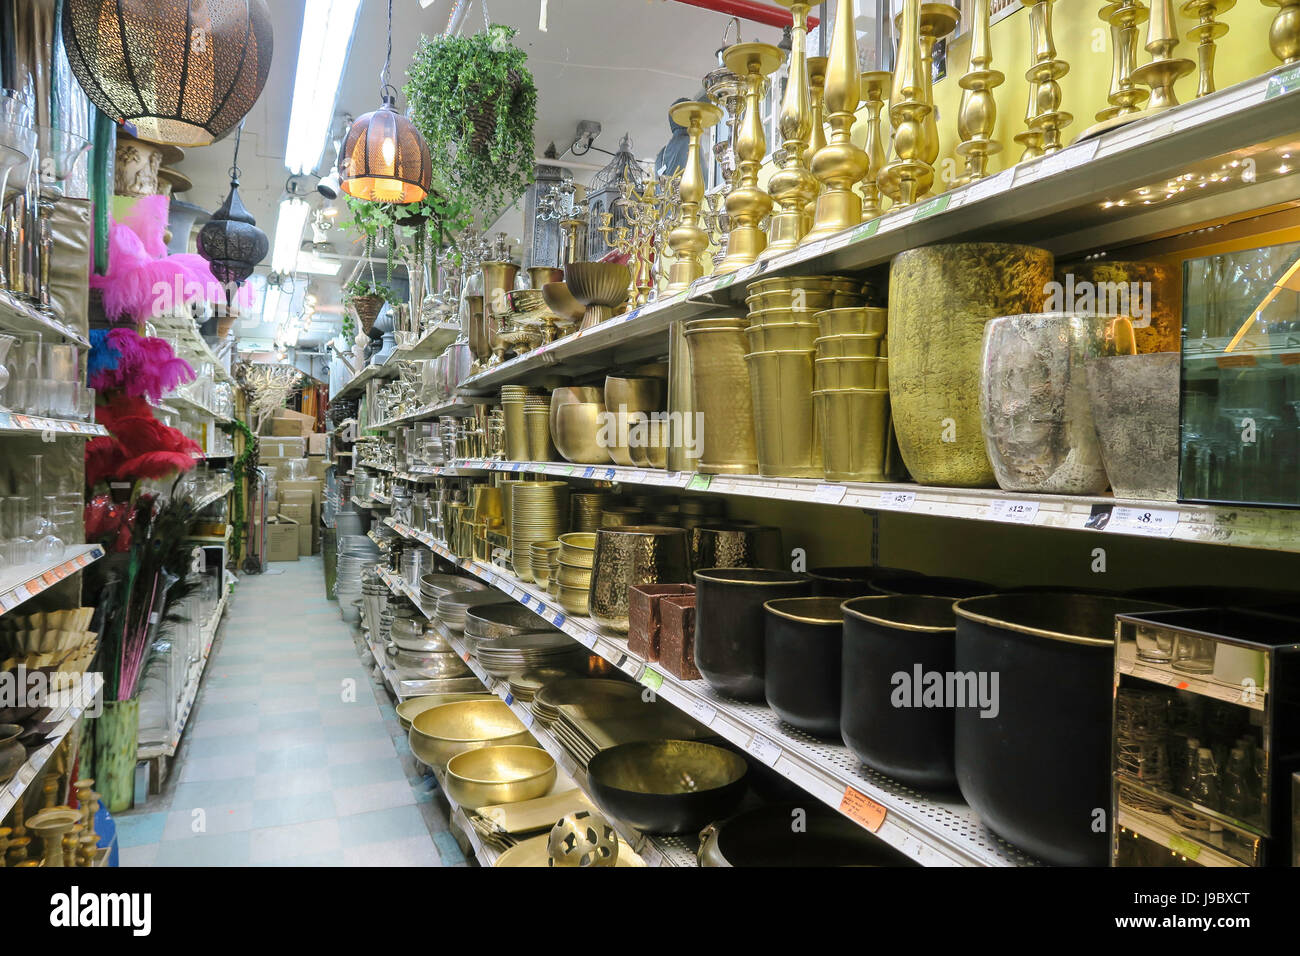 Jamali Floral & Garden Supplies in the Flower District, New York City, USA Stock Photo